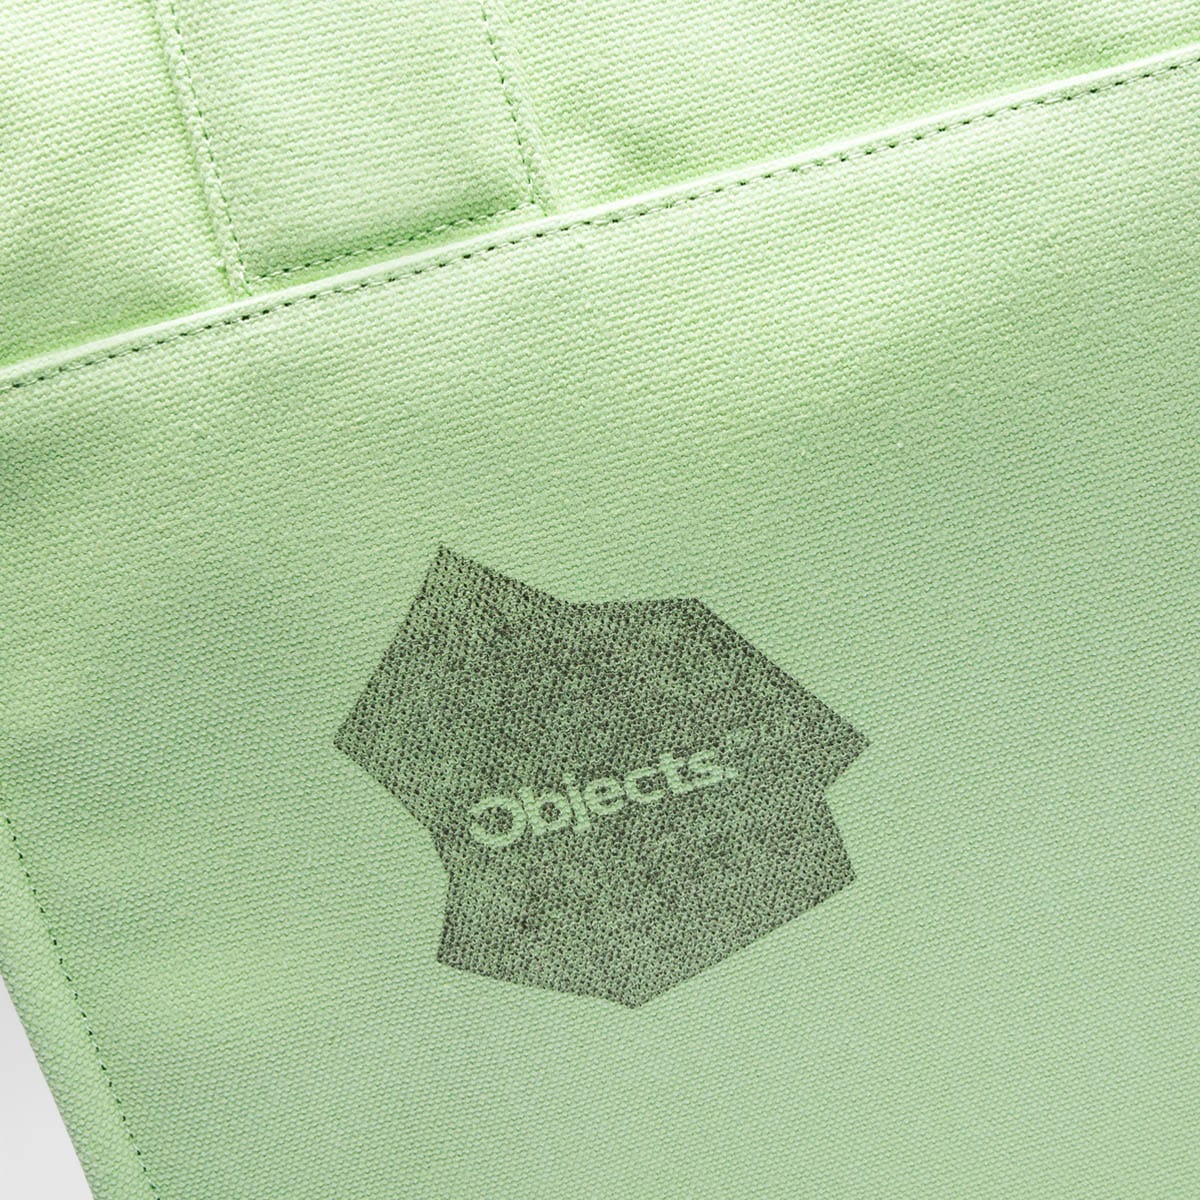 Objects IV Life Bags MINT GREEN / O/S CHAPTER 2 LOGO TOTE